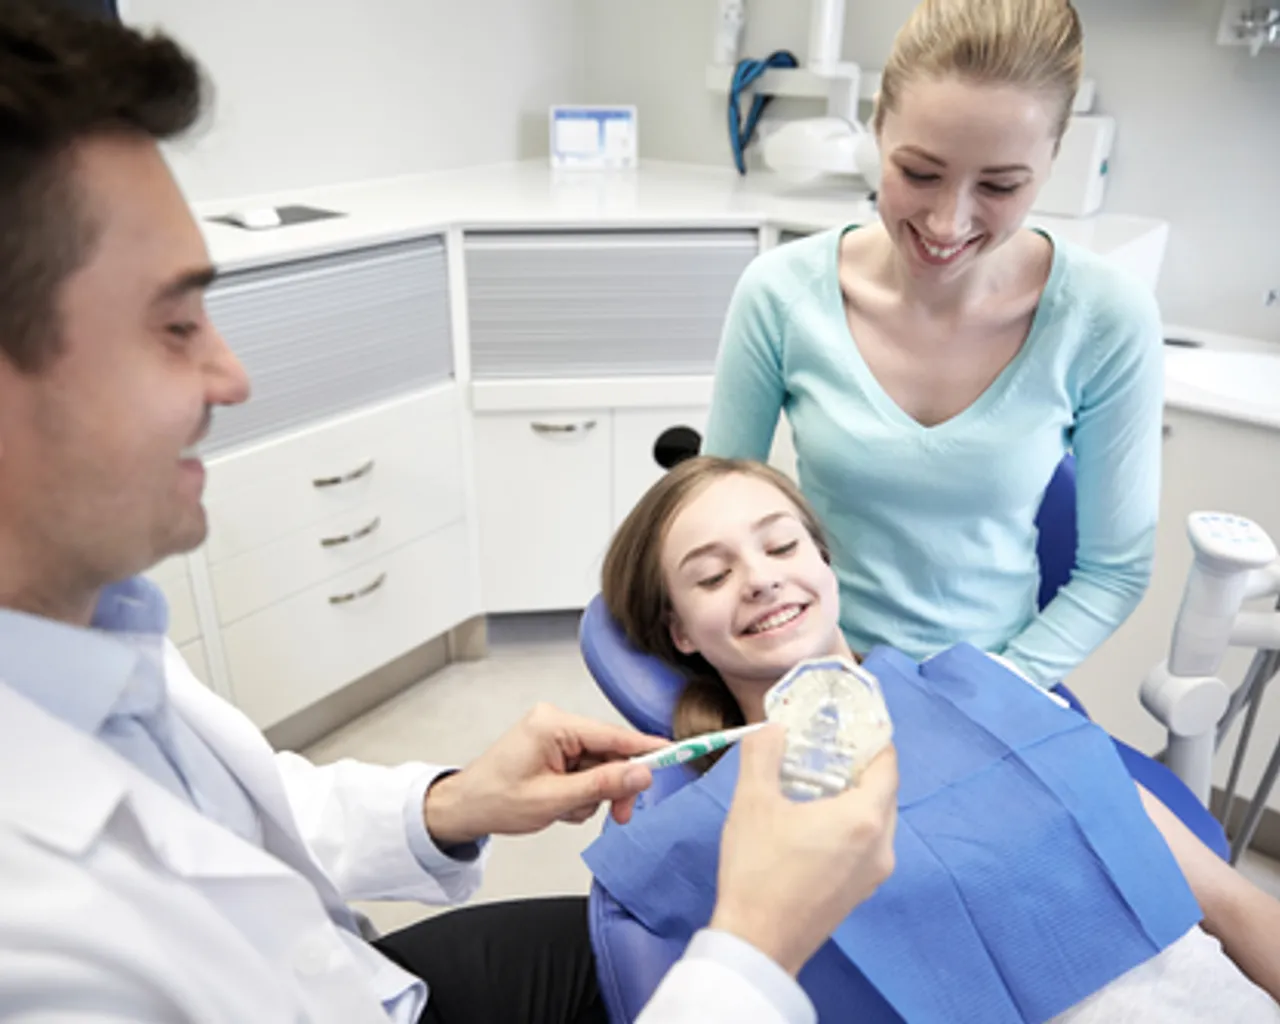 Dentist educating young patient who is smiling